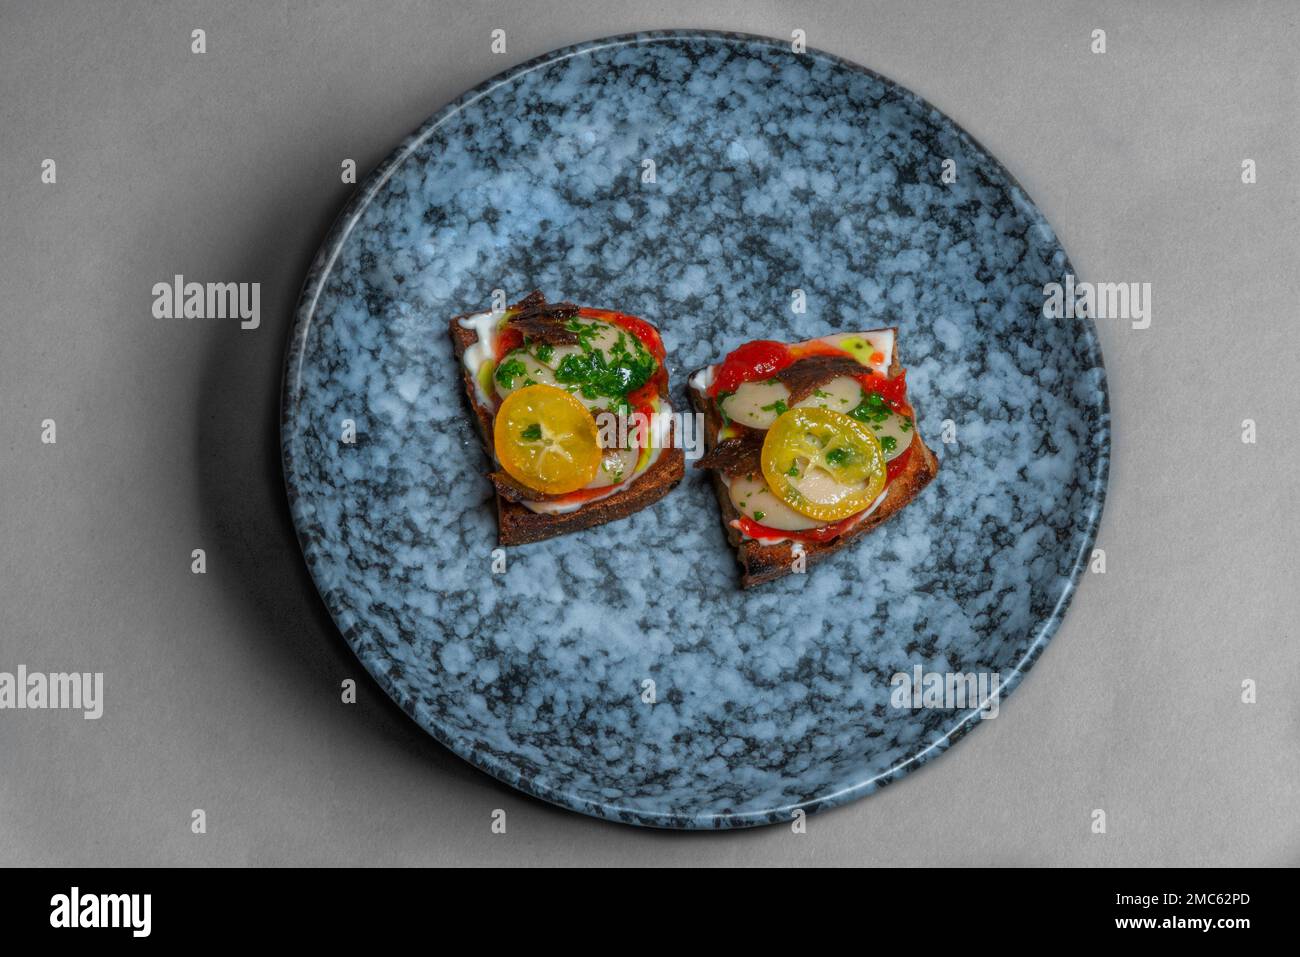 A Birdseye view of a modern plated meal, shot against a plain grey background. Stock Photo